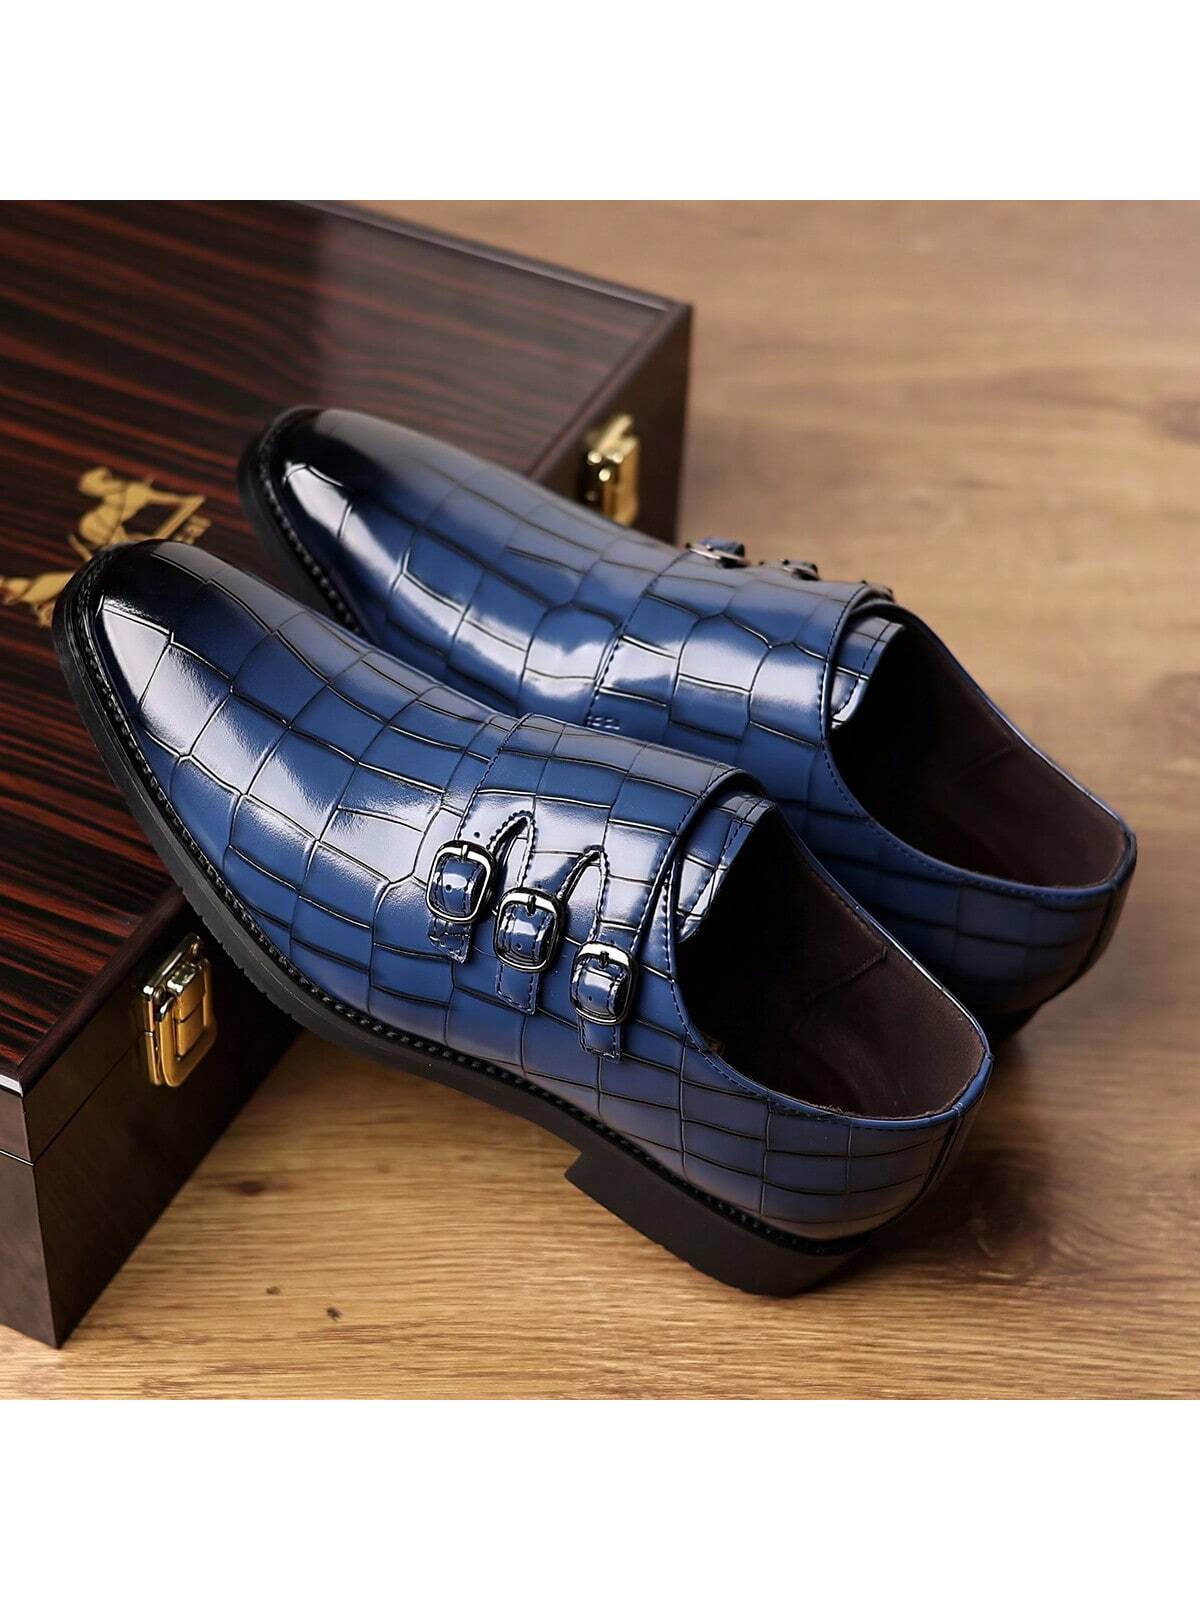 A Pair Of Business Fashion Trendy Casual Men's Formal Shoes And Leather Shoes